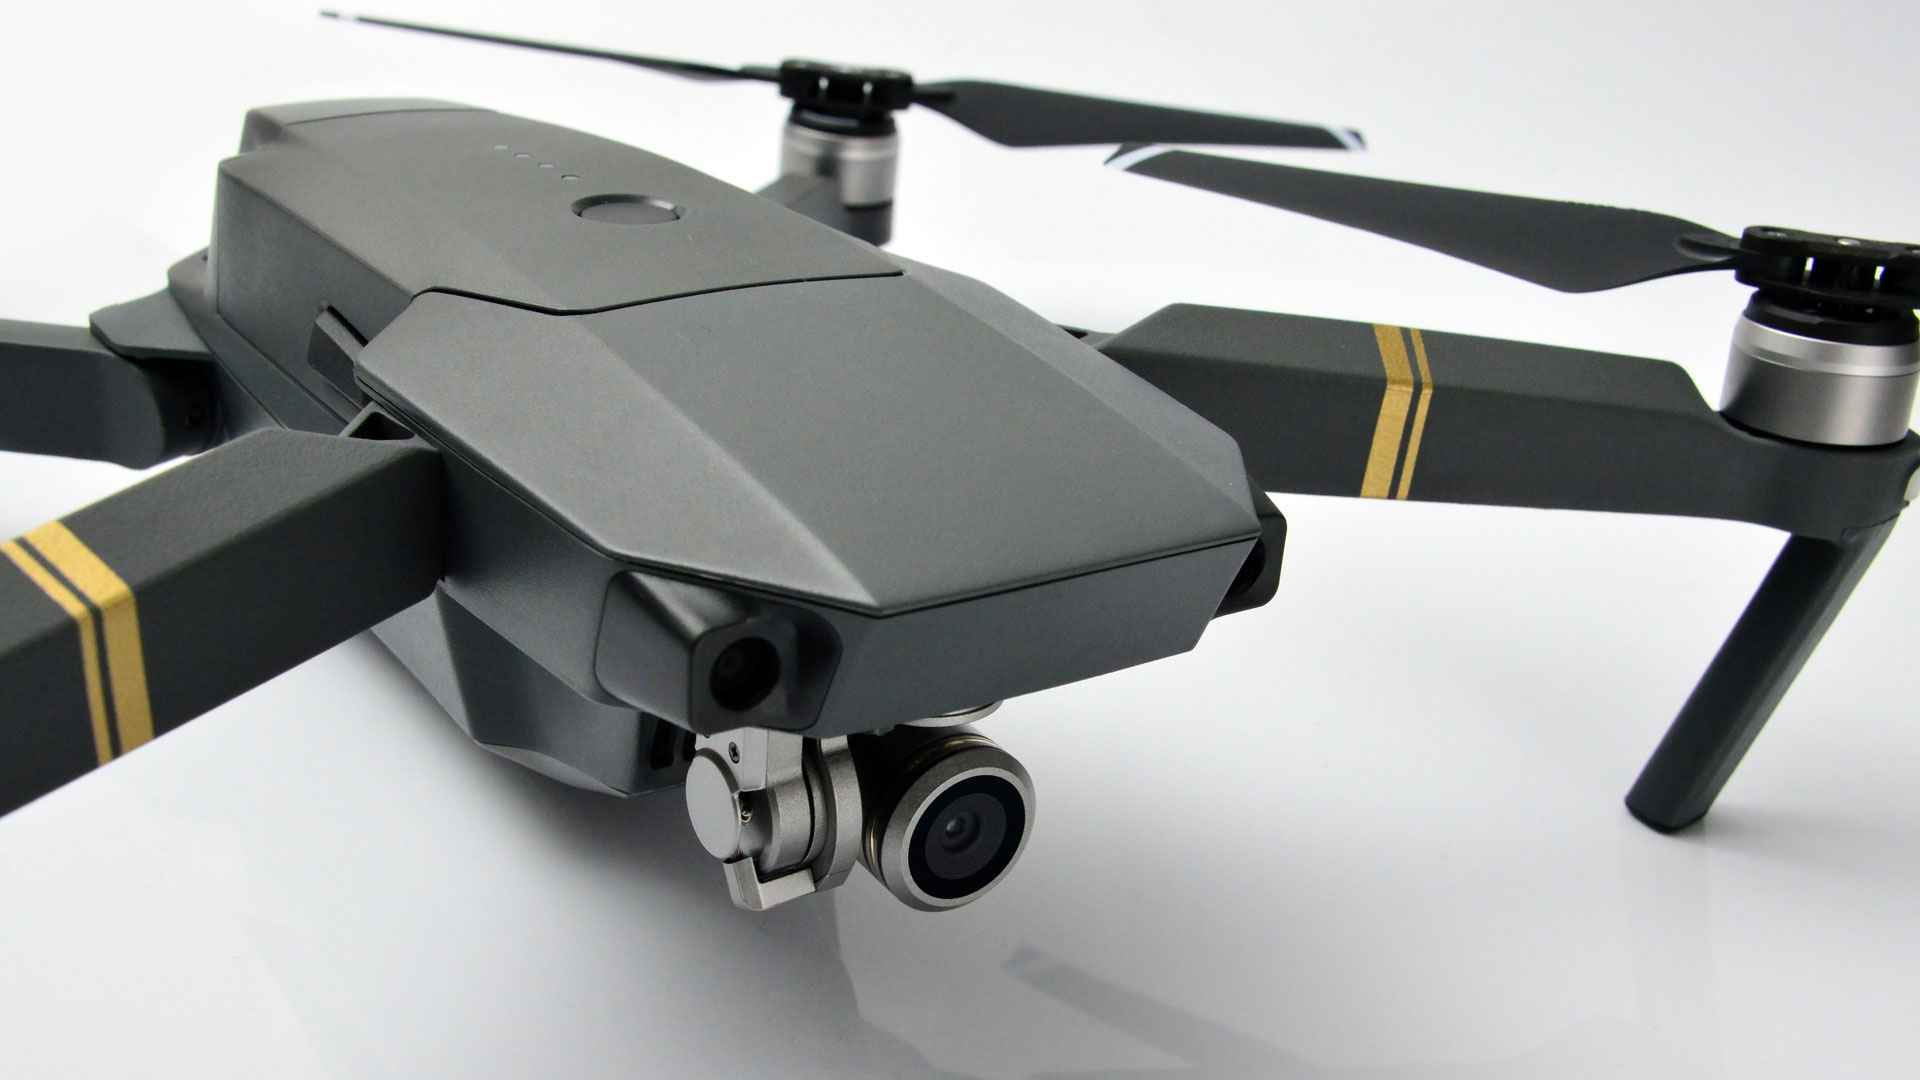 Know-About-DJI-Mavic-Pro-Became-the-Best-Drone-on-LightRoomNews